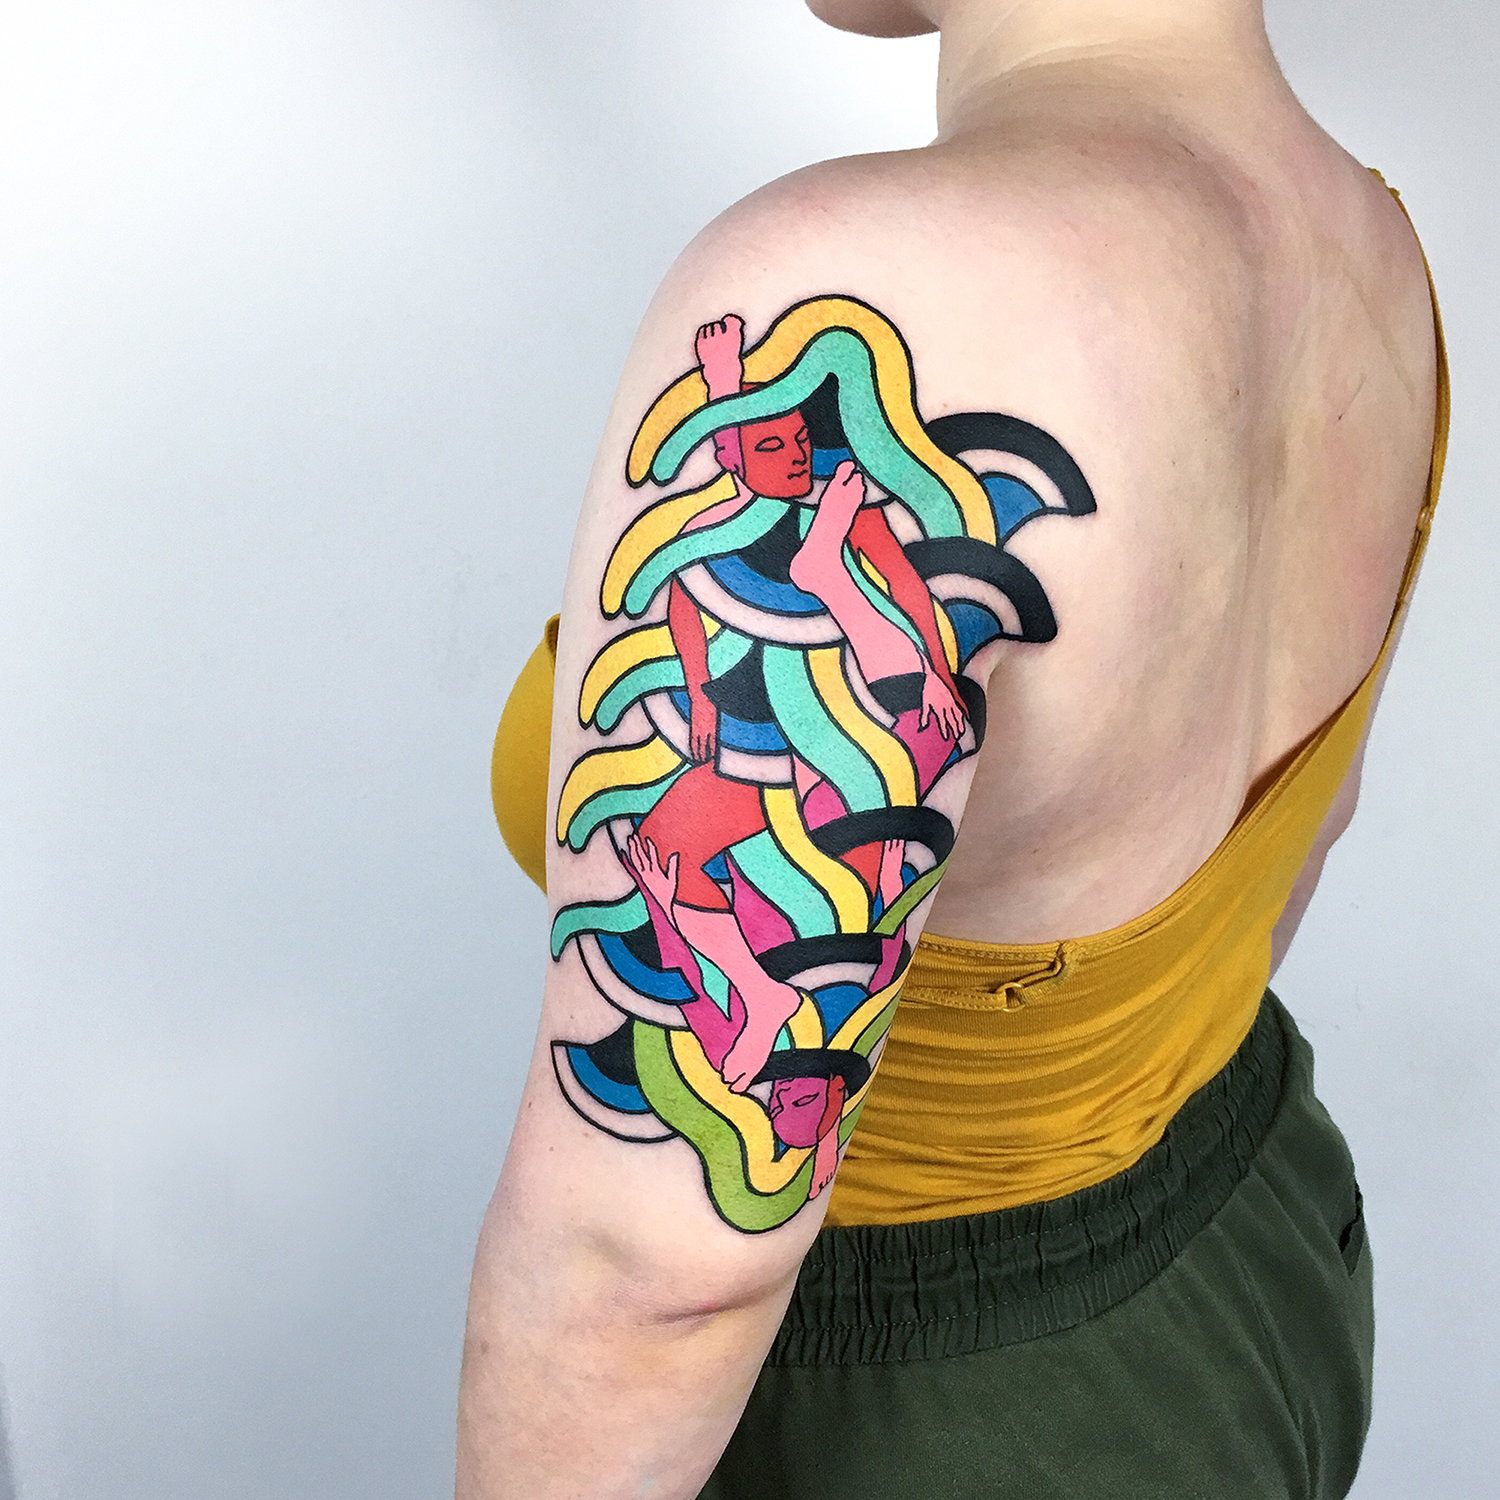 bizarre design on arm, colors by imrich kovacs, interview